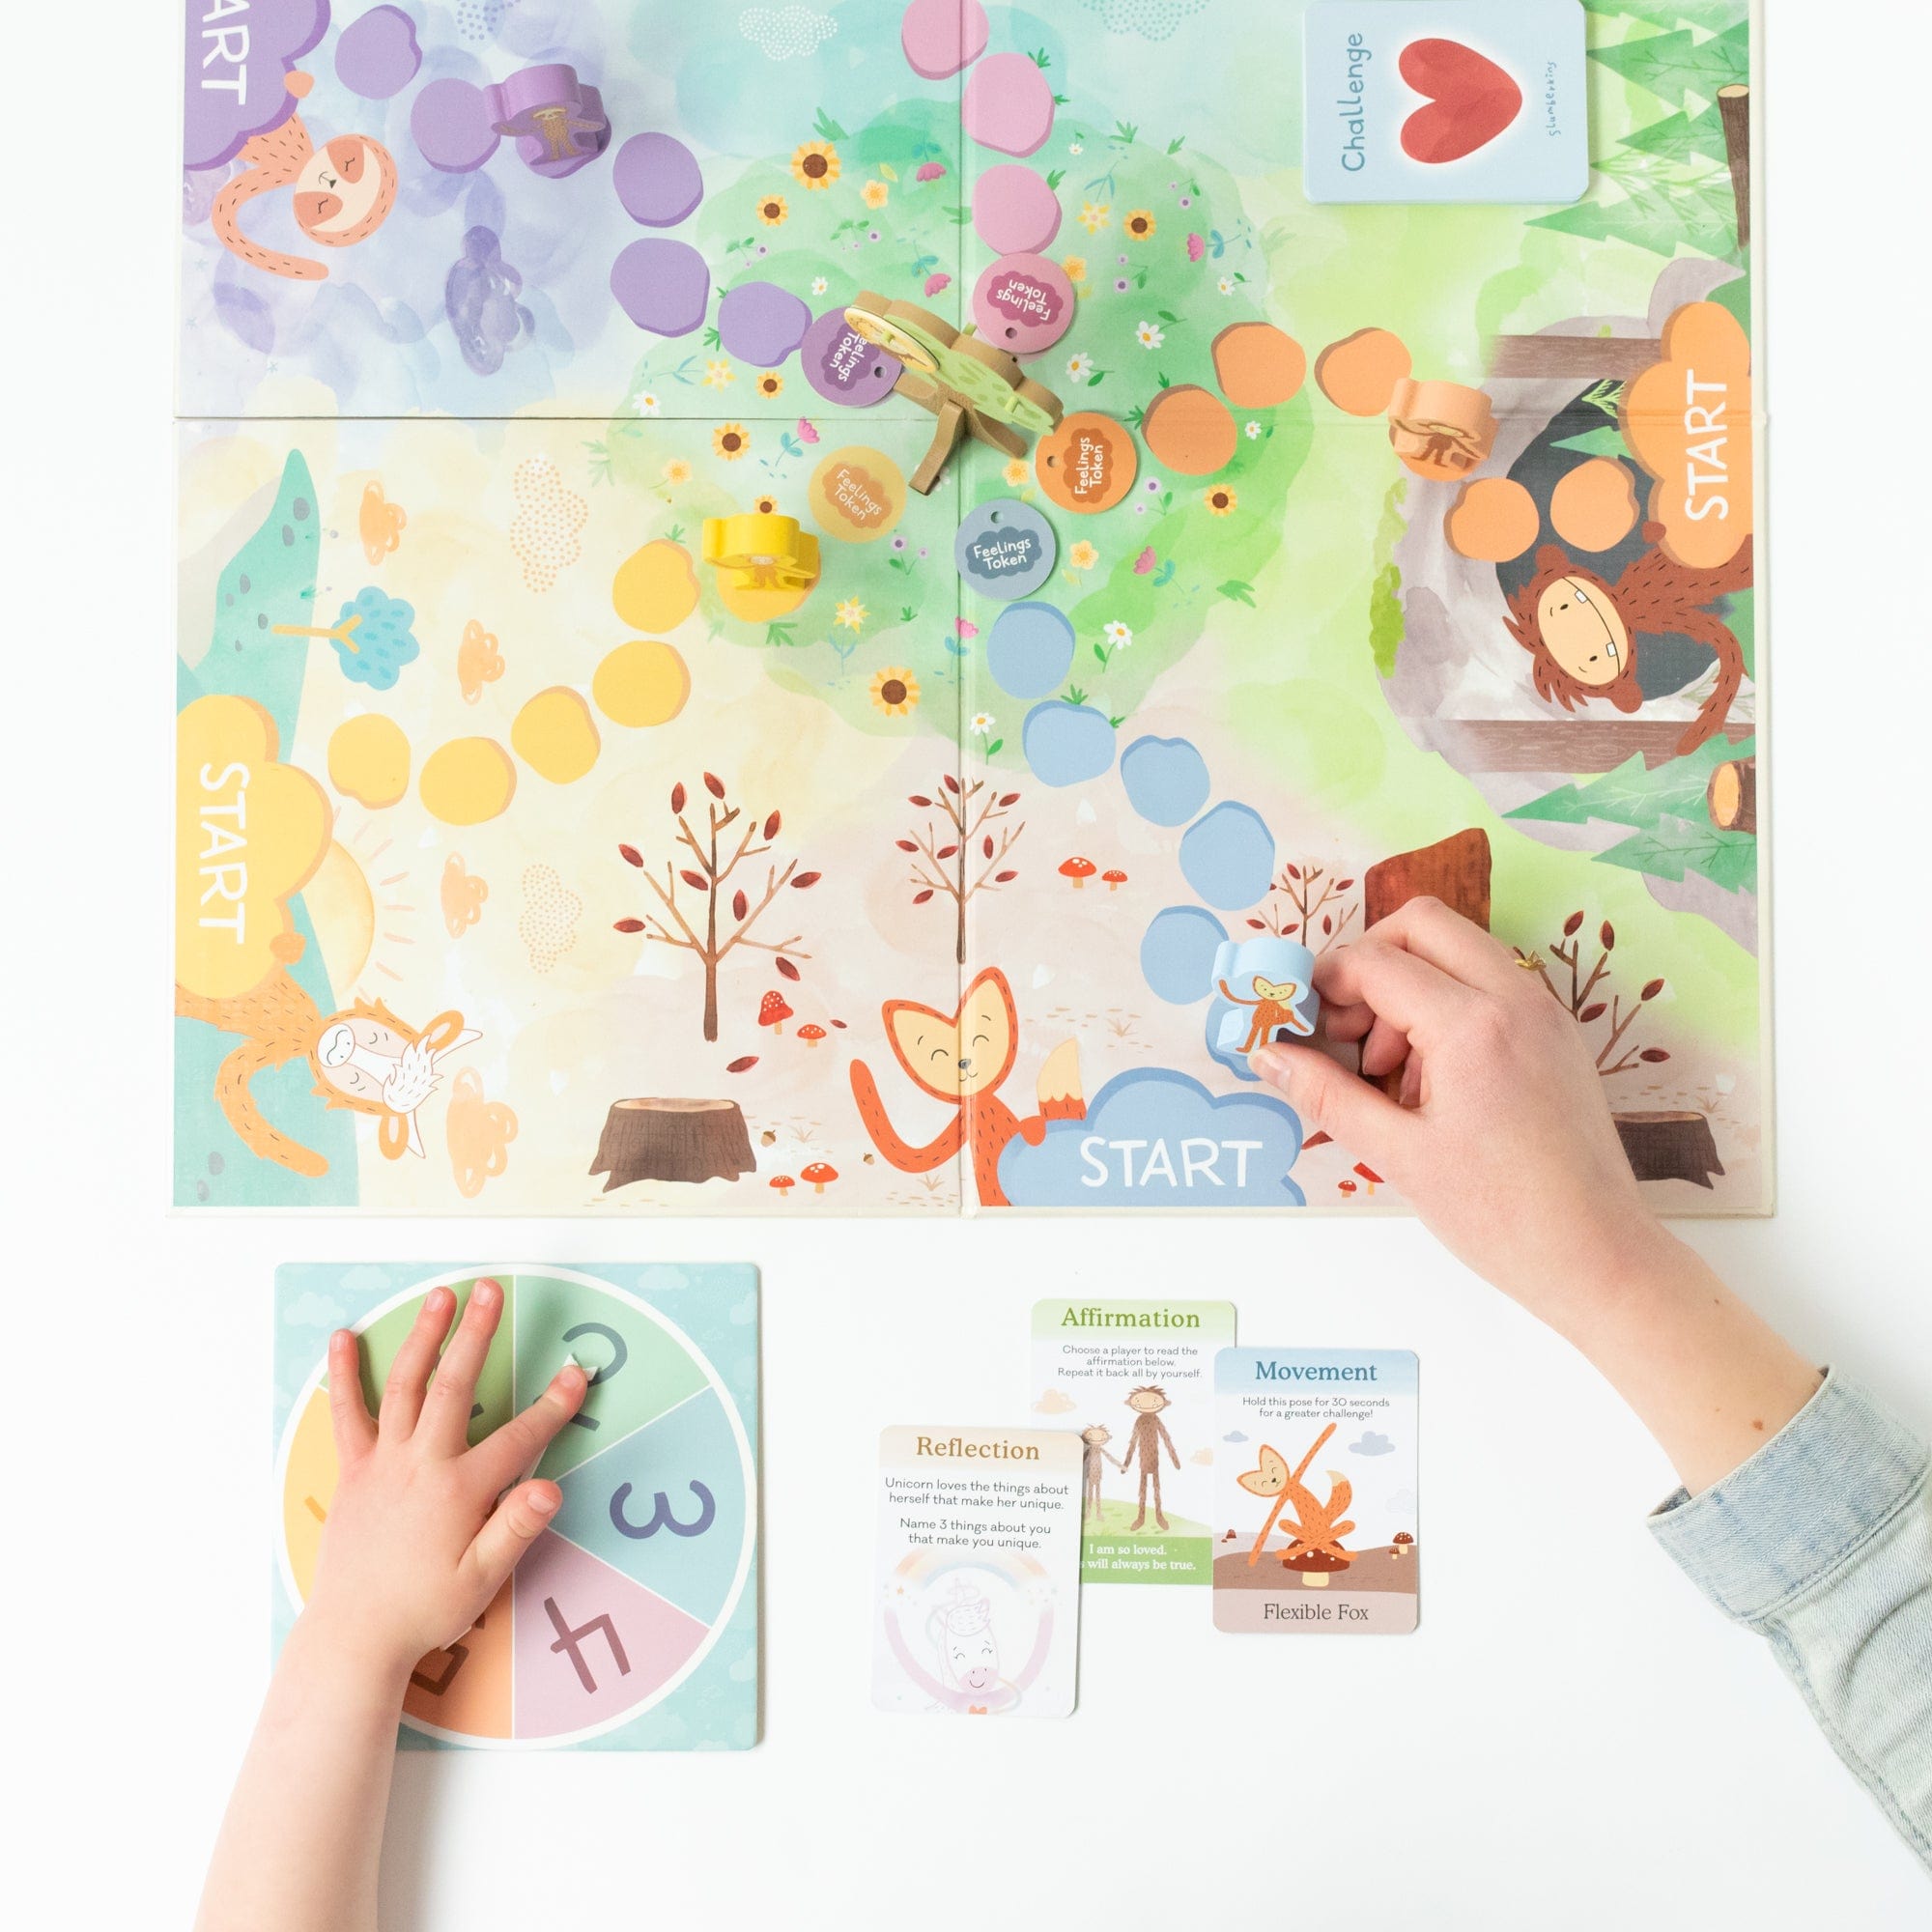 Feelings Adventure Board Game - View Product